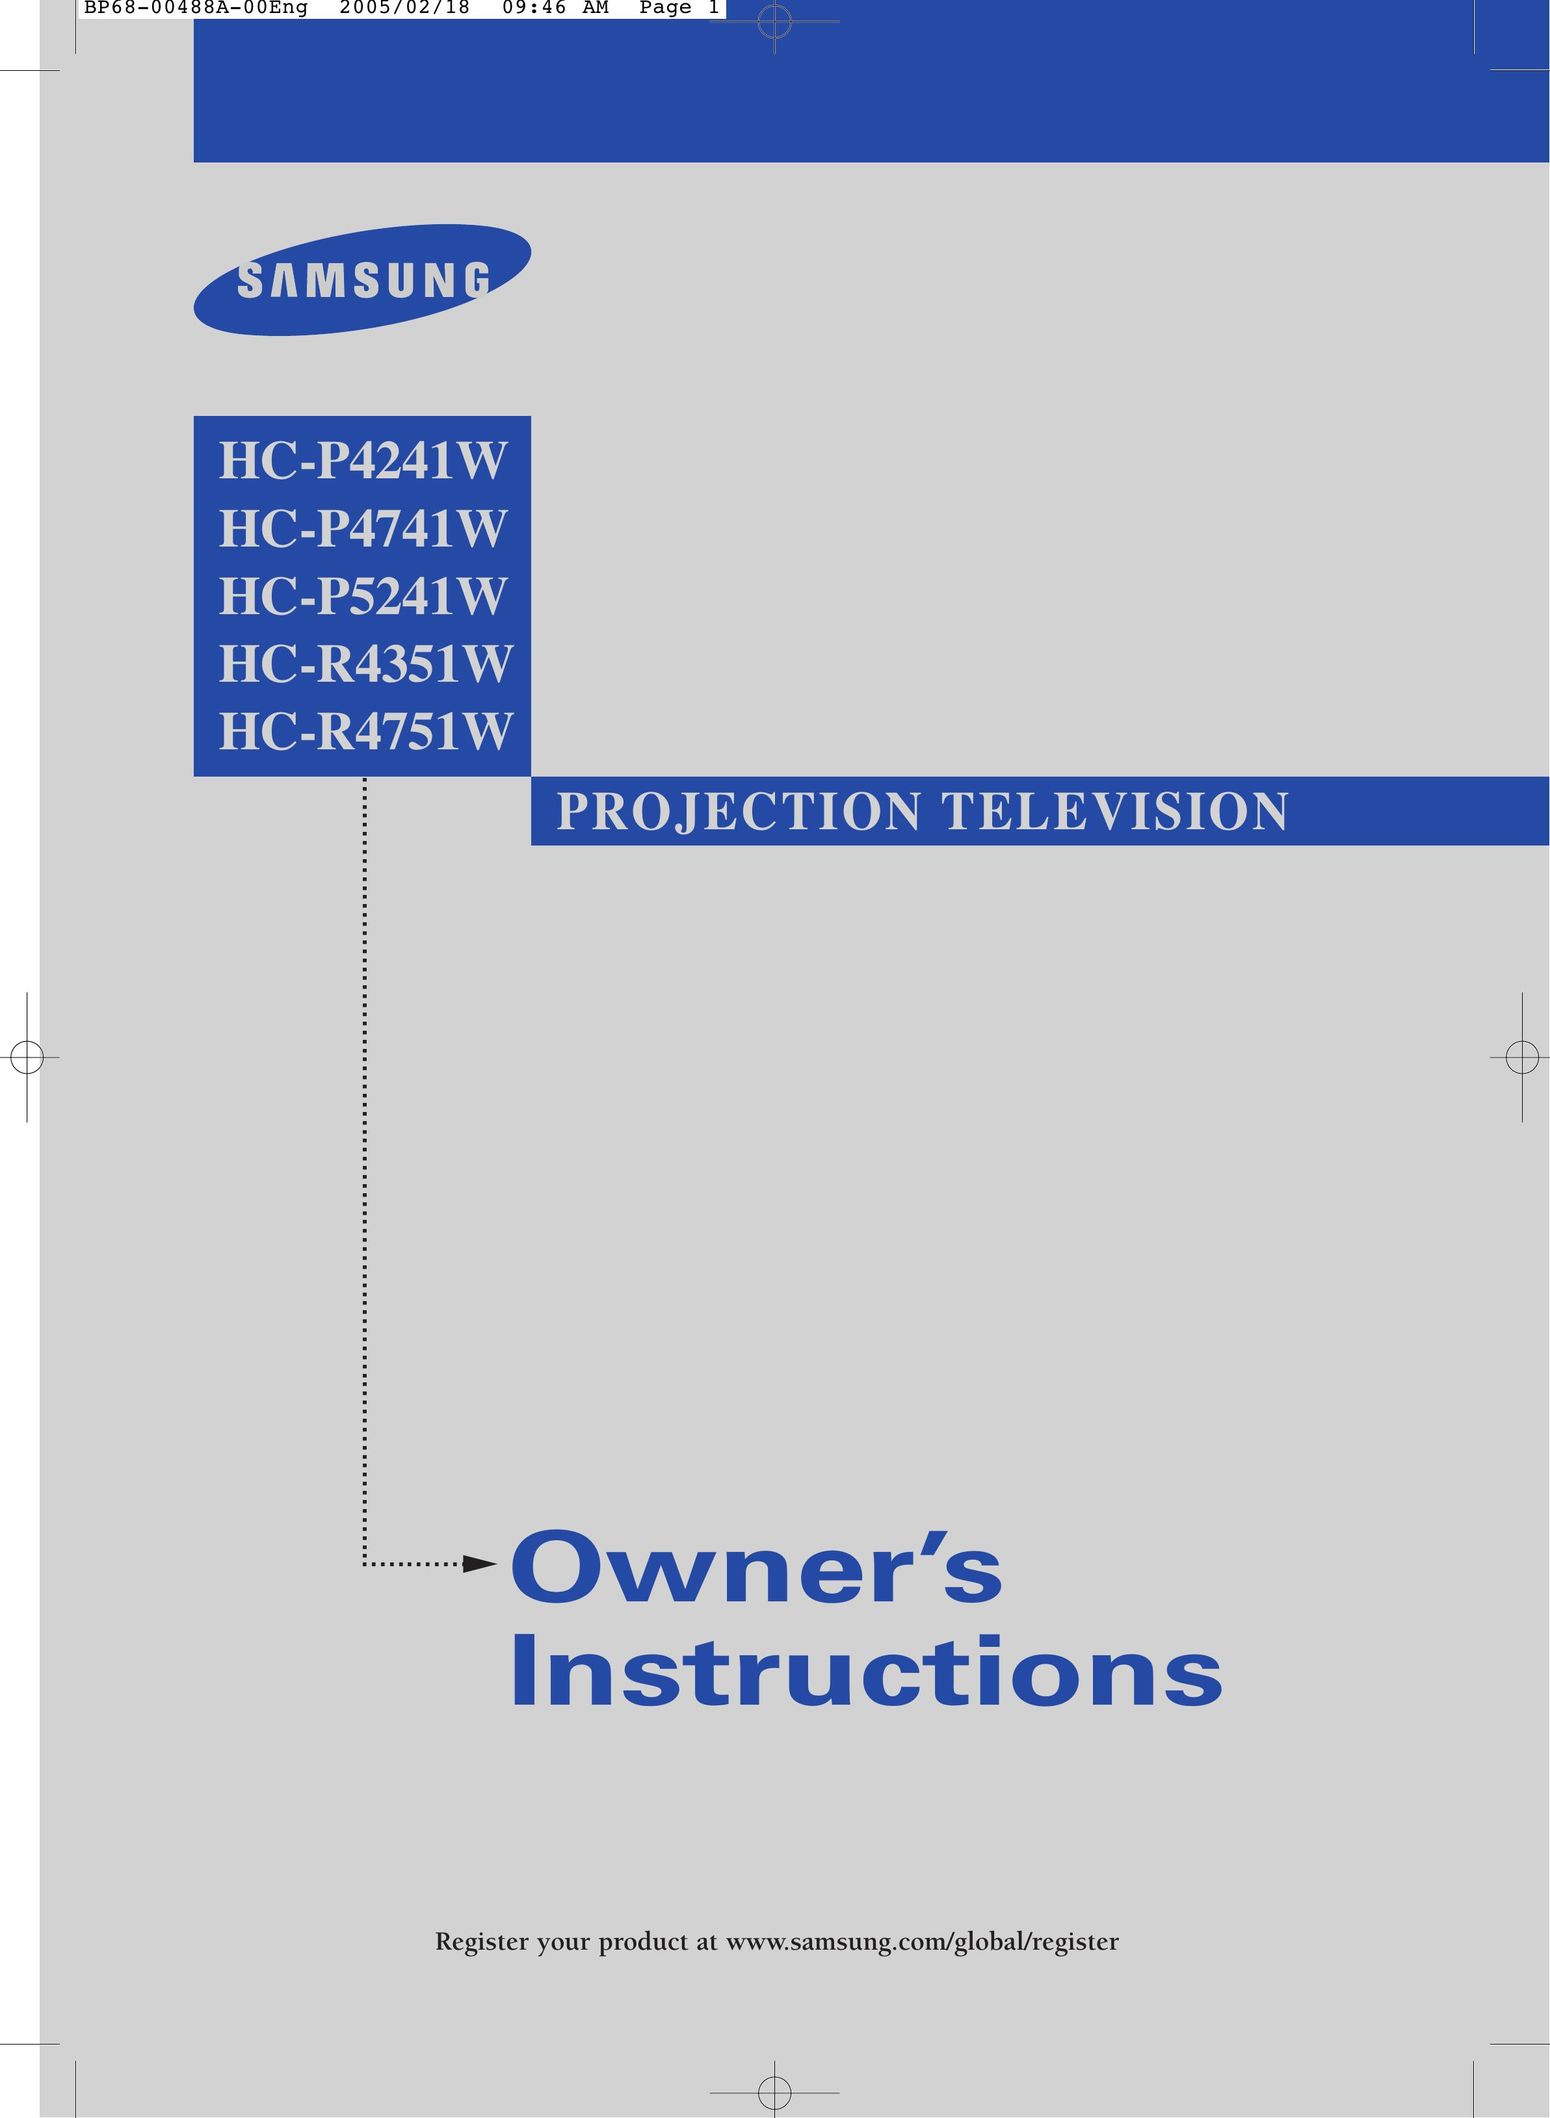 Samsung HC-P5241W Projection Television User Manual